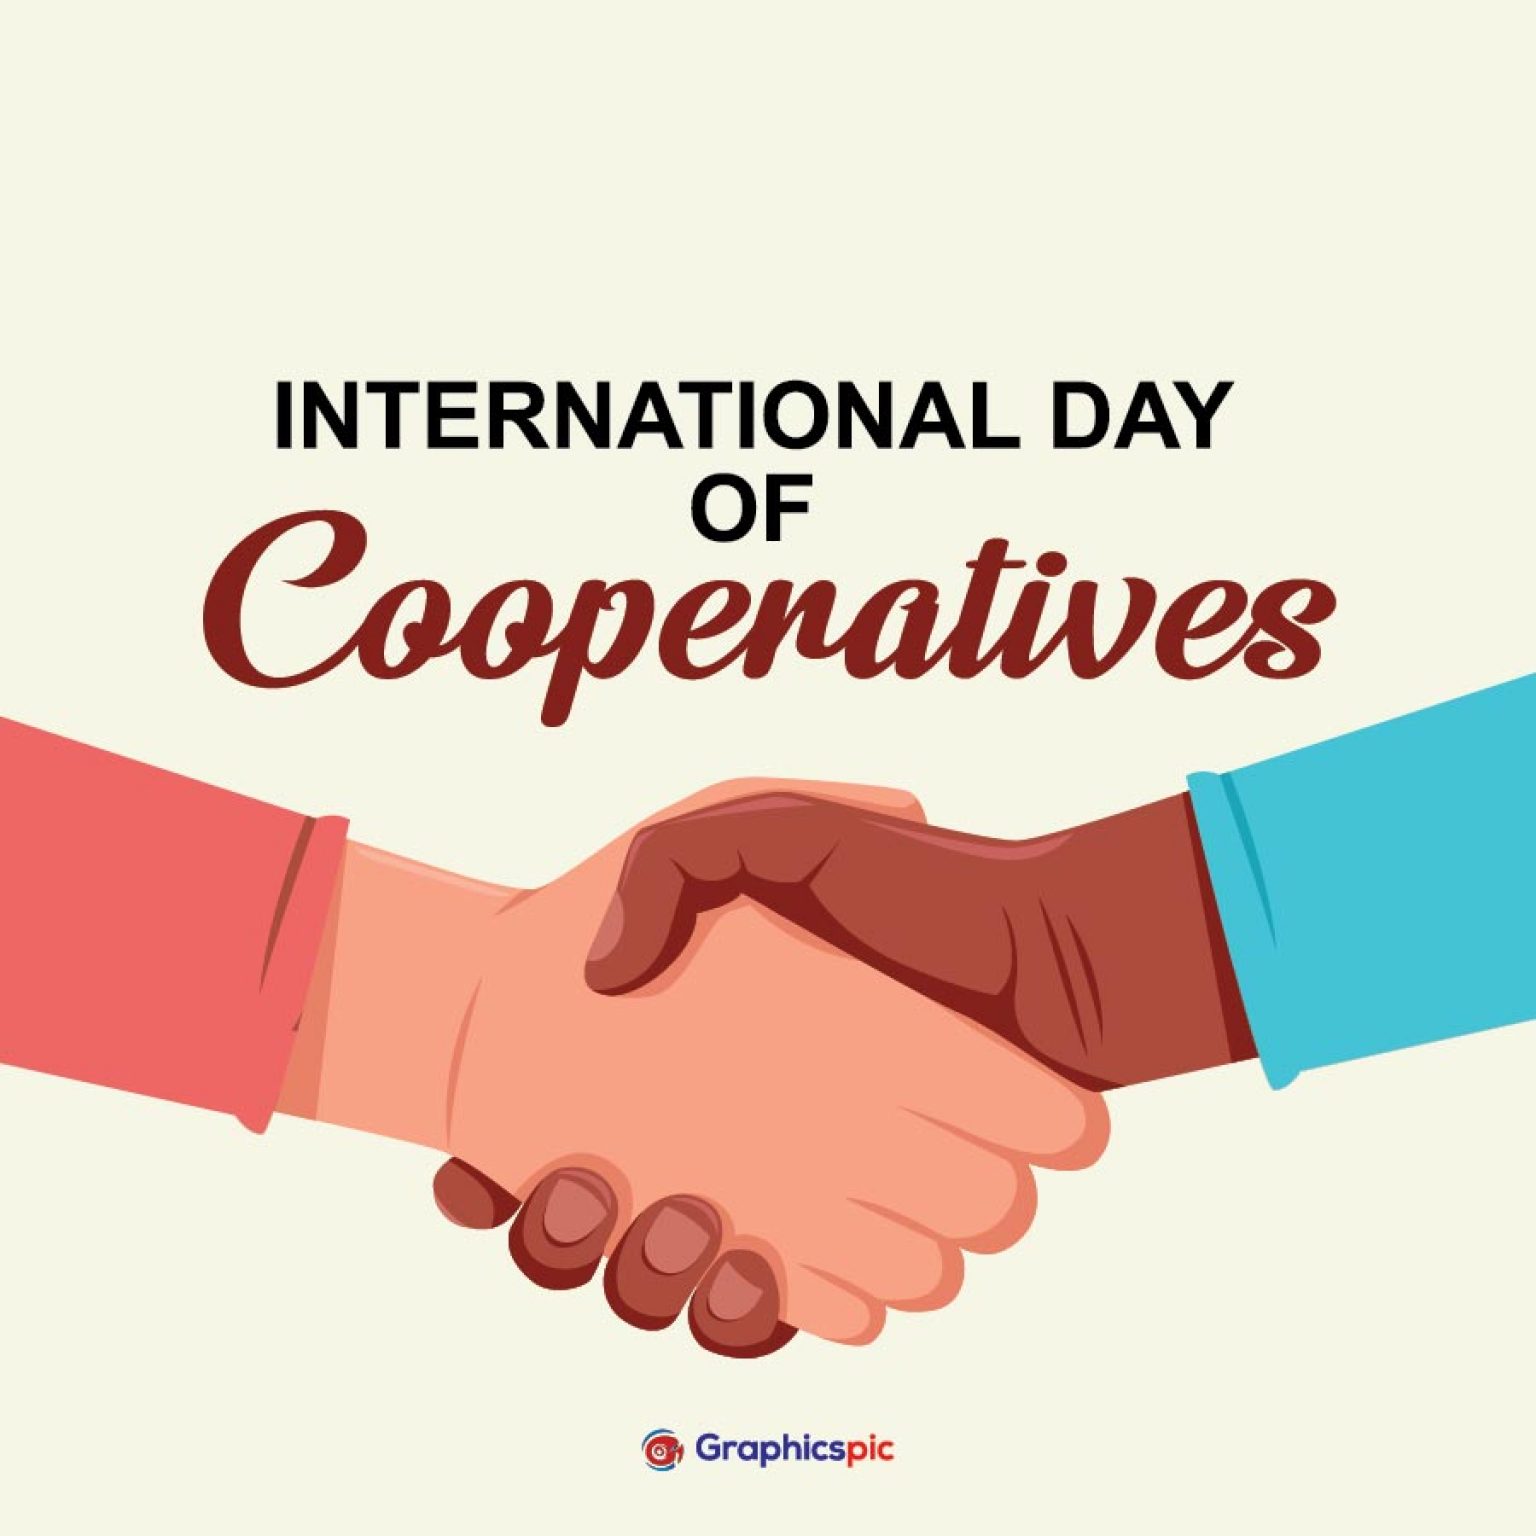 International Day of Cooperatives vector. Cooperation of people